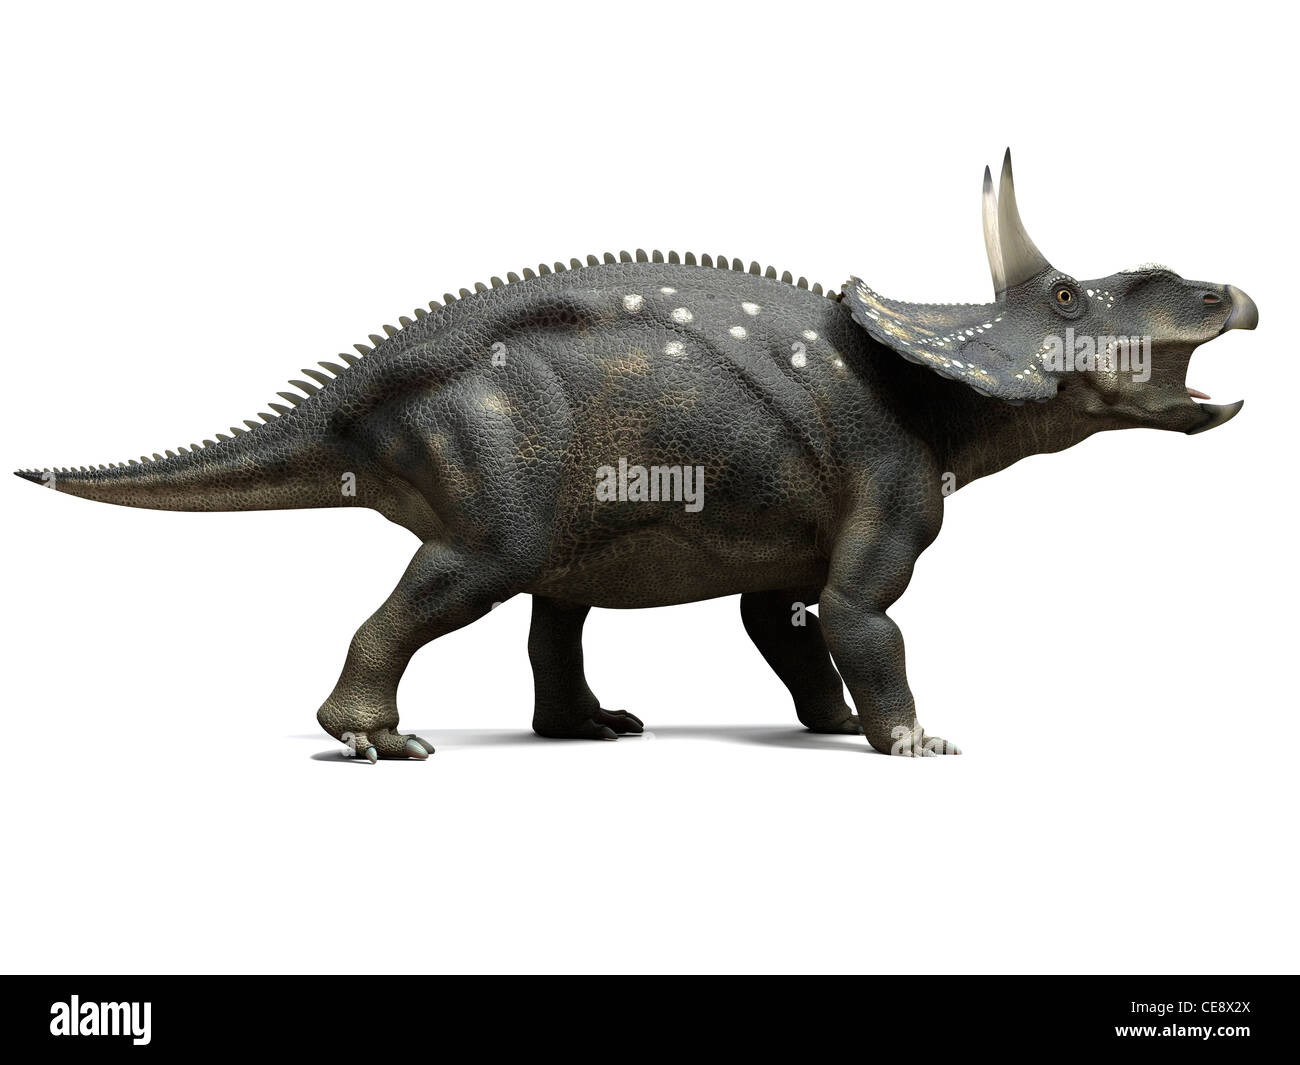 Nedoceratops dinosaur computer artwork dinosaur formerly known Diceratops lived 70 million years ago Cretaceous period. Stock Photo